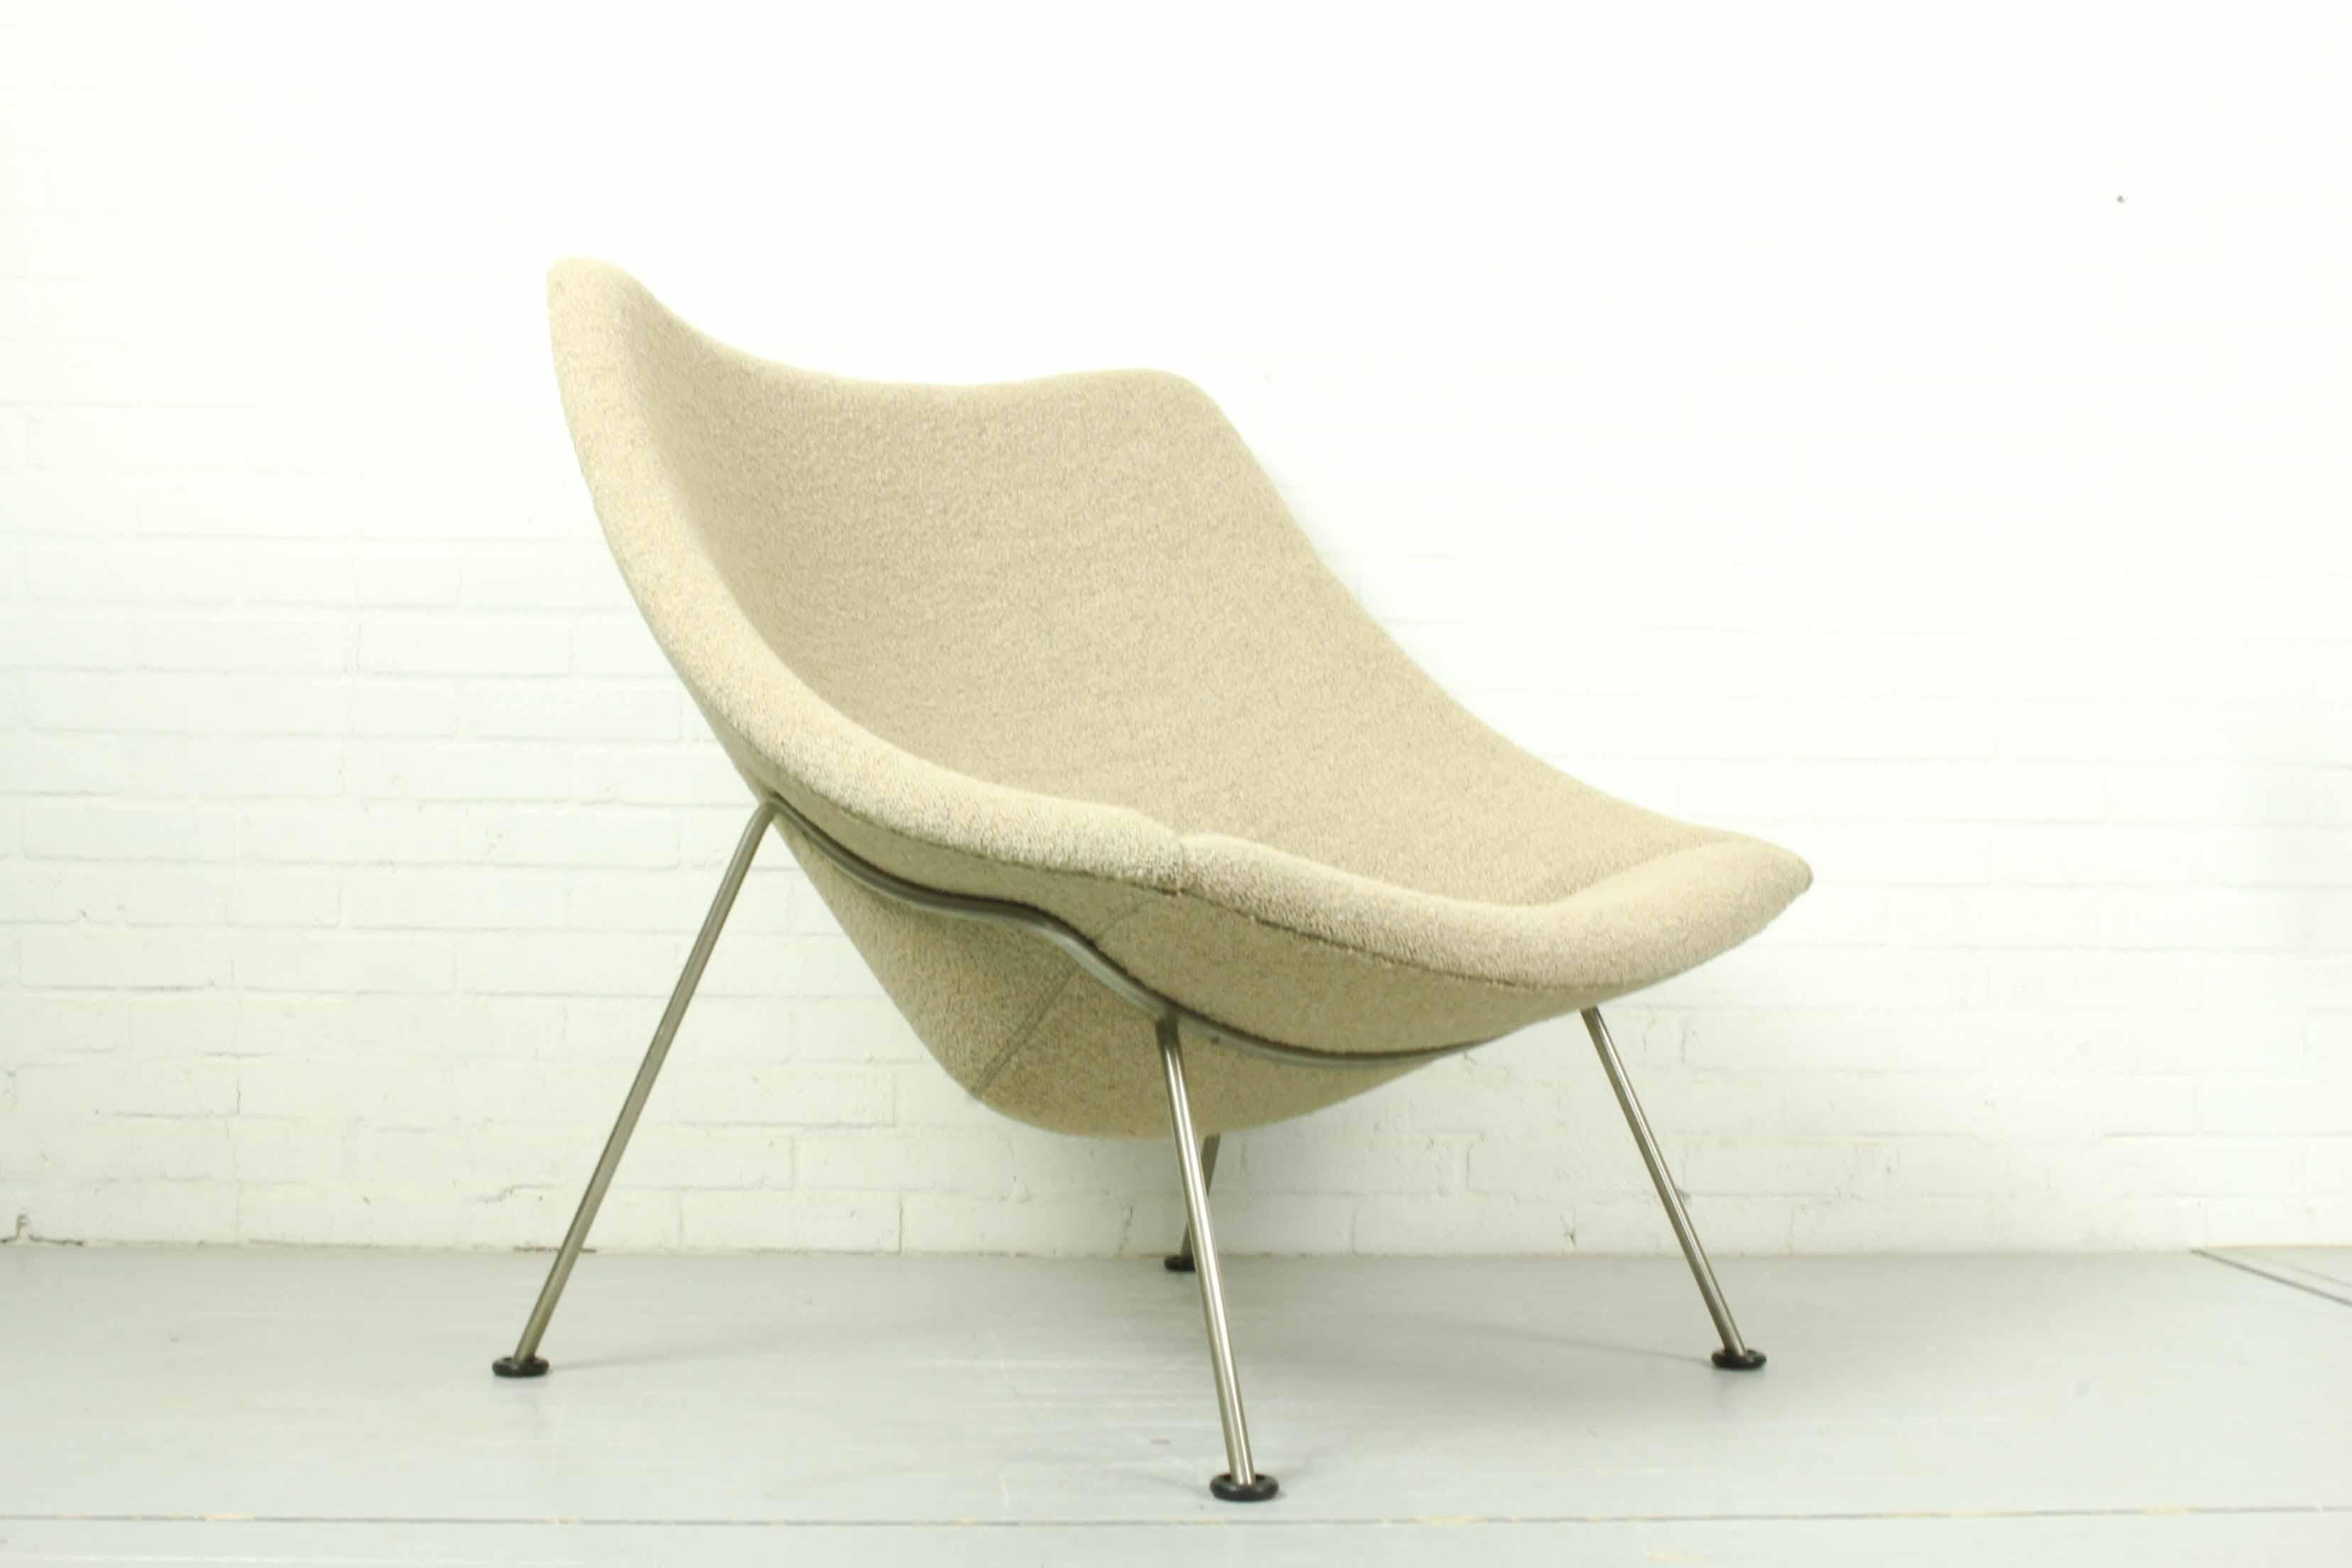 Model Oyster lounge chair by Pierre Paulin for Artifort, Netherlands, Shell covered with foam and upholstered in a beautiful fabric (Designtex Lambert color: Latte BOUCLE ). Base made of nickel-plated steel rods.